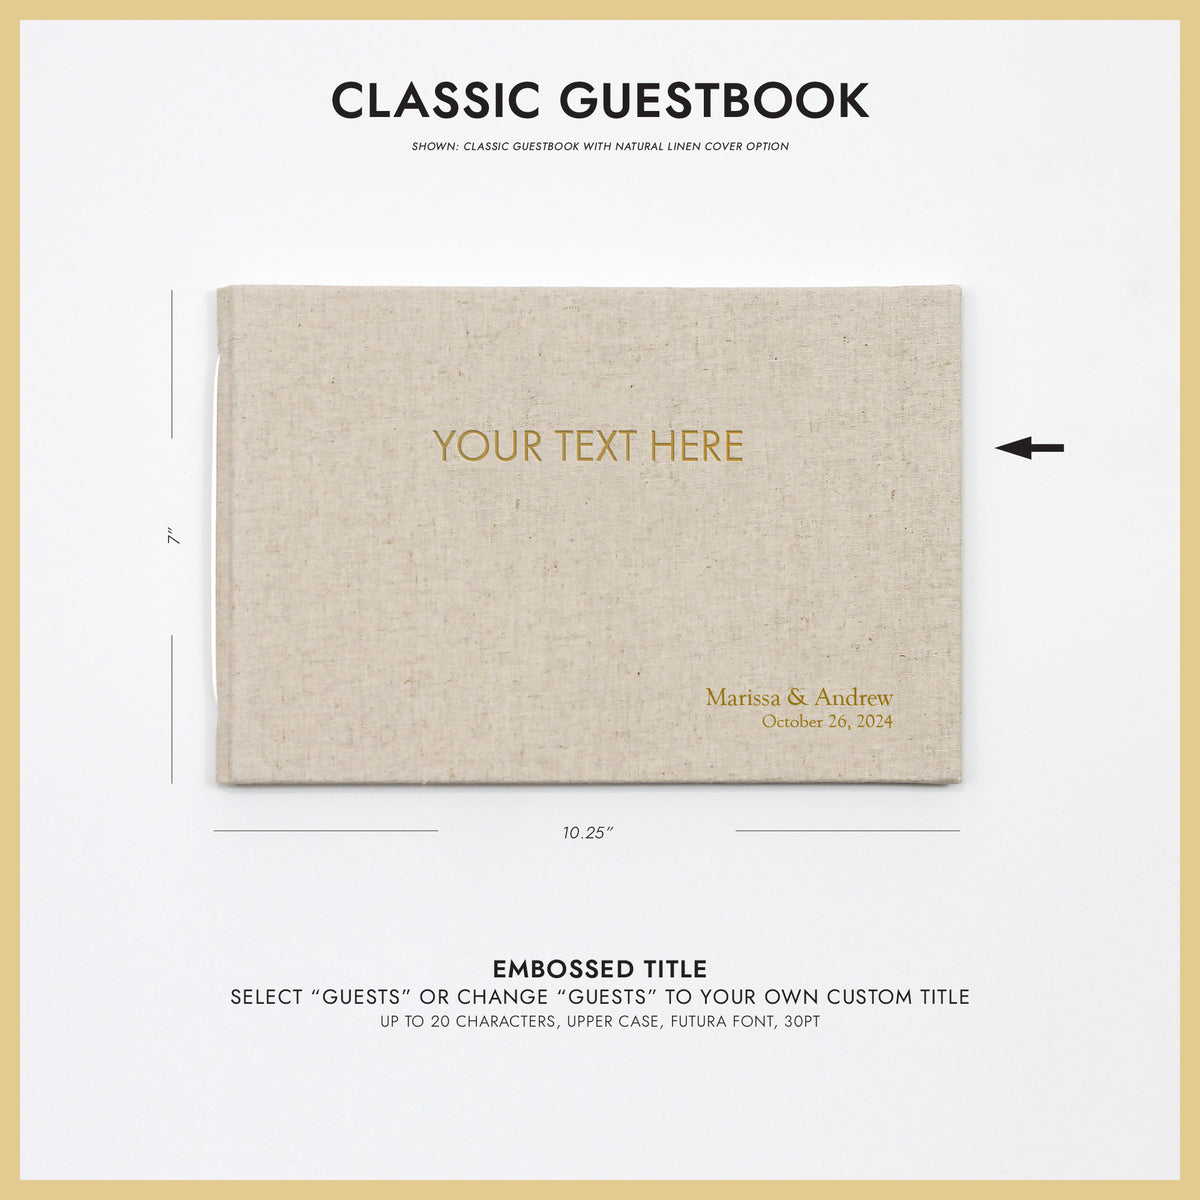 Classic Guestbook | Cover: Misty Blue Silk | Available Personalized